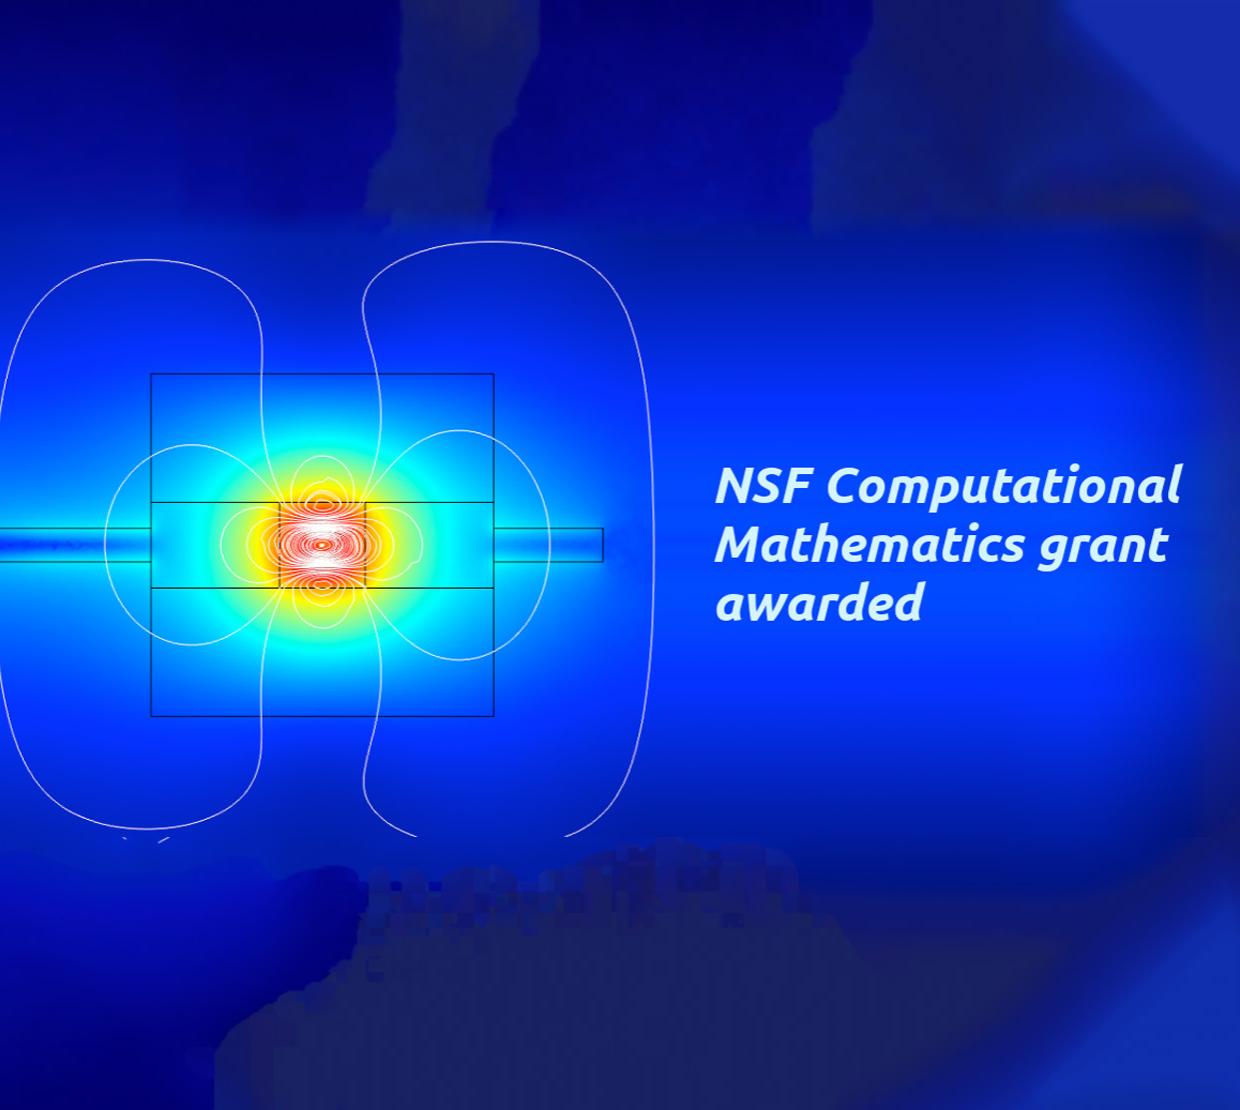 Depiction of a magnetic field with text that reads "NSF Computational Mathematics grant award."